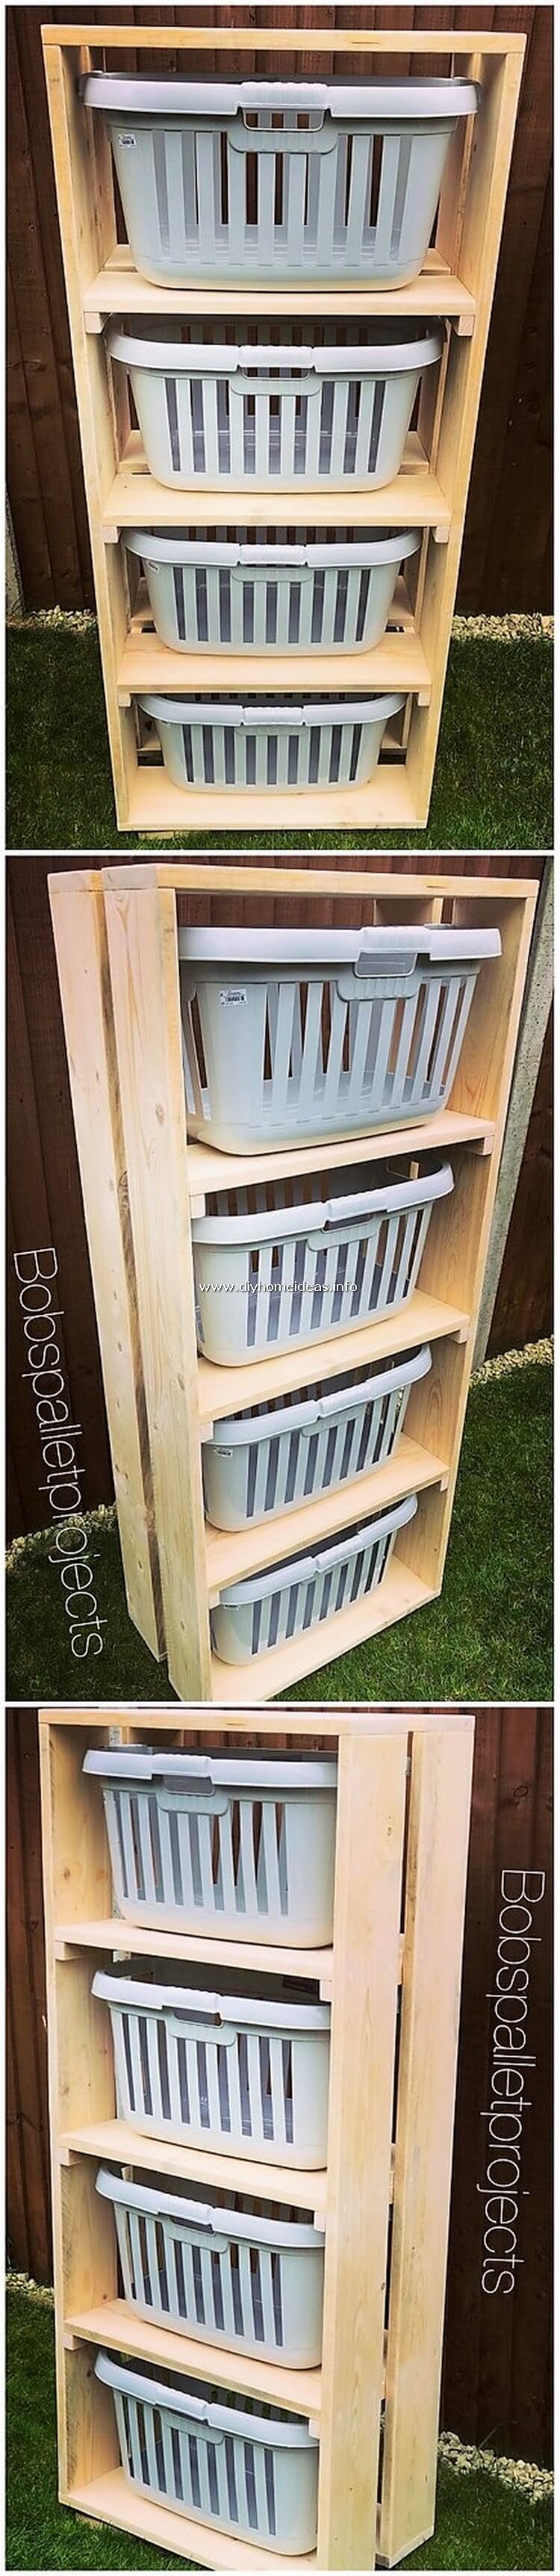 Pallet Table with Laundry Baskets